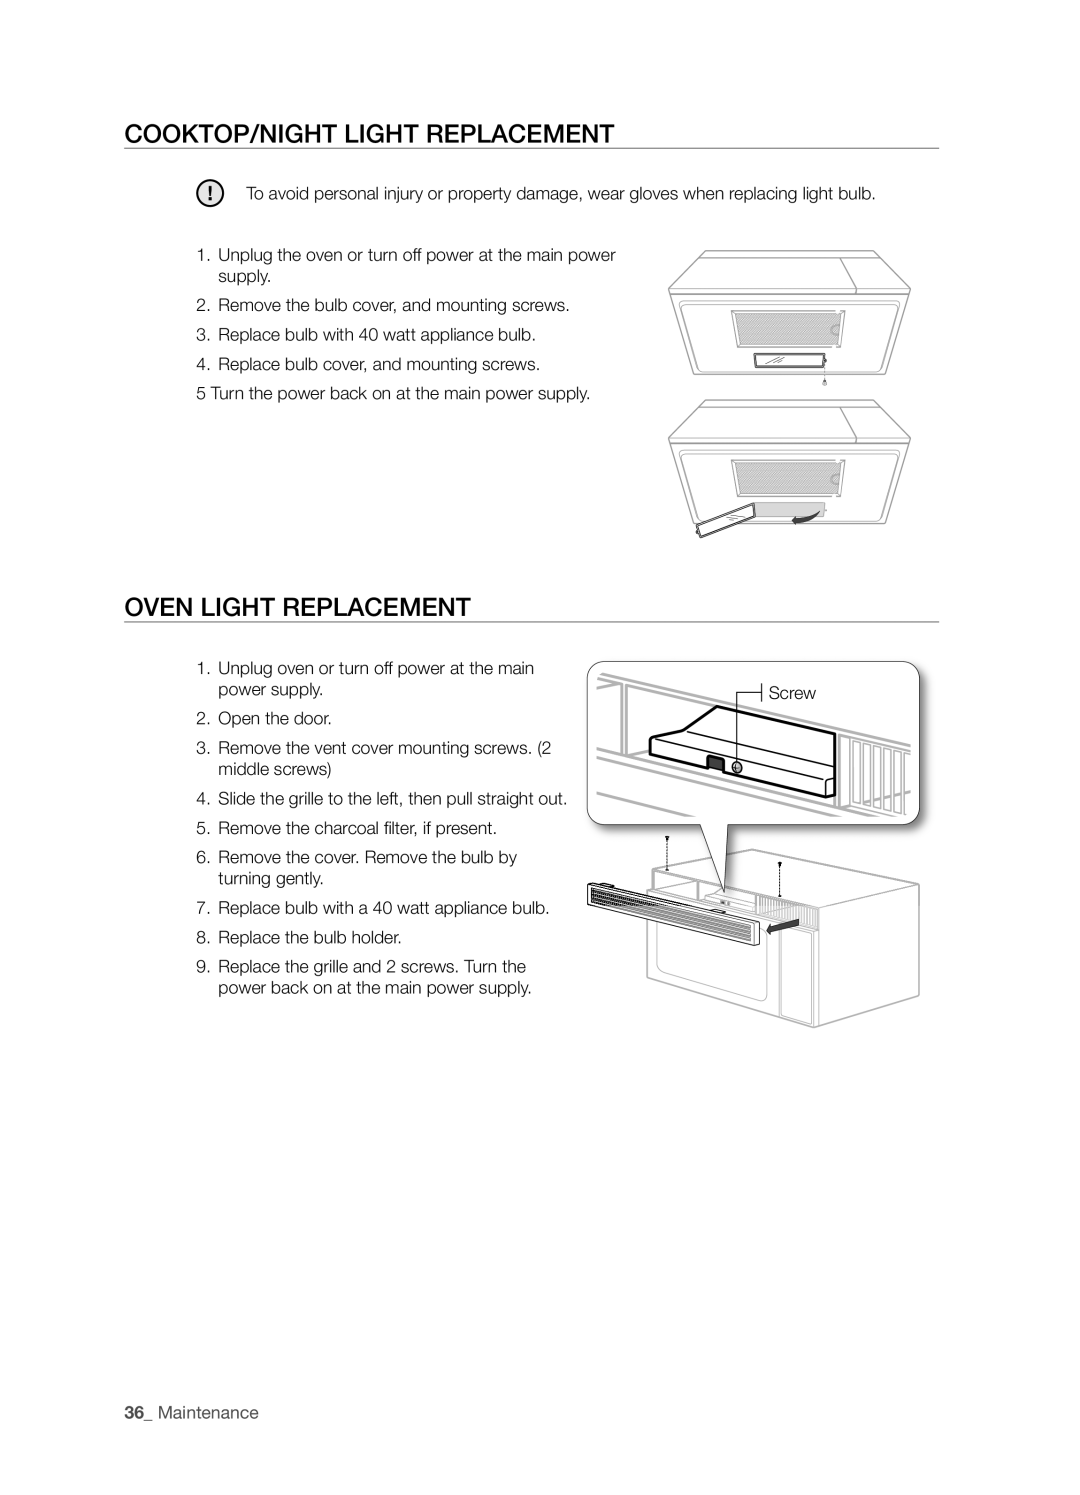 Samsung SMH6165 user manual COOktOp/nIght LIght repLaCement, Oven LIght repLaCement,  Maintenance 